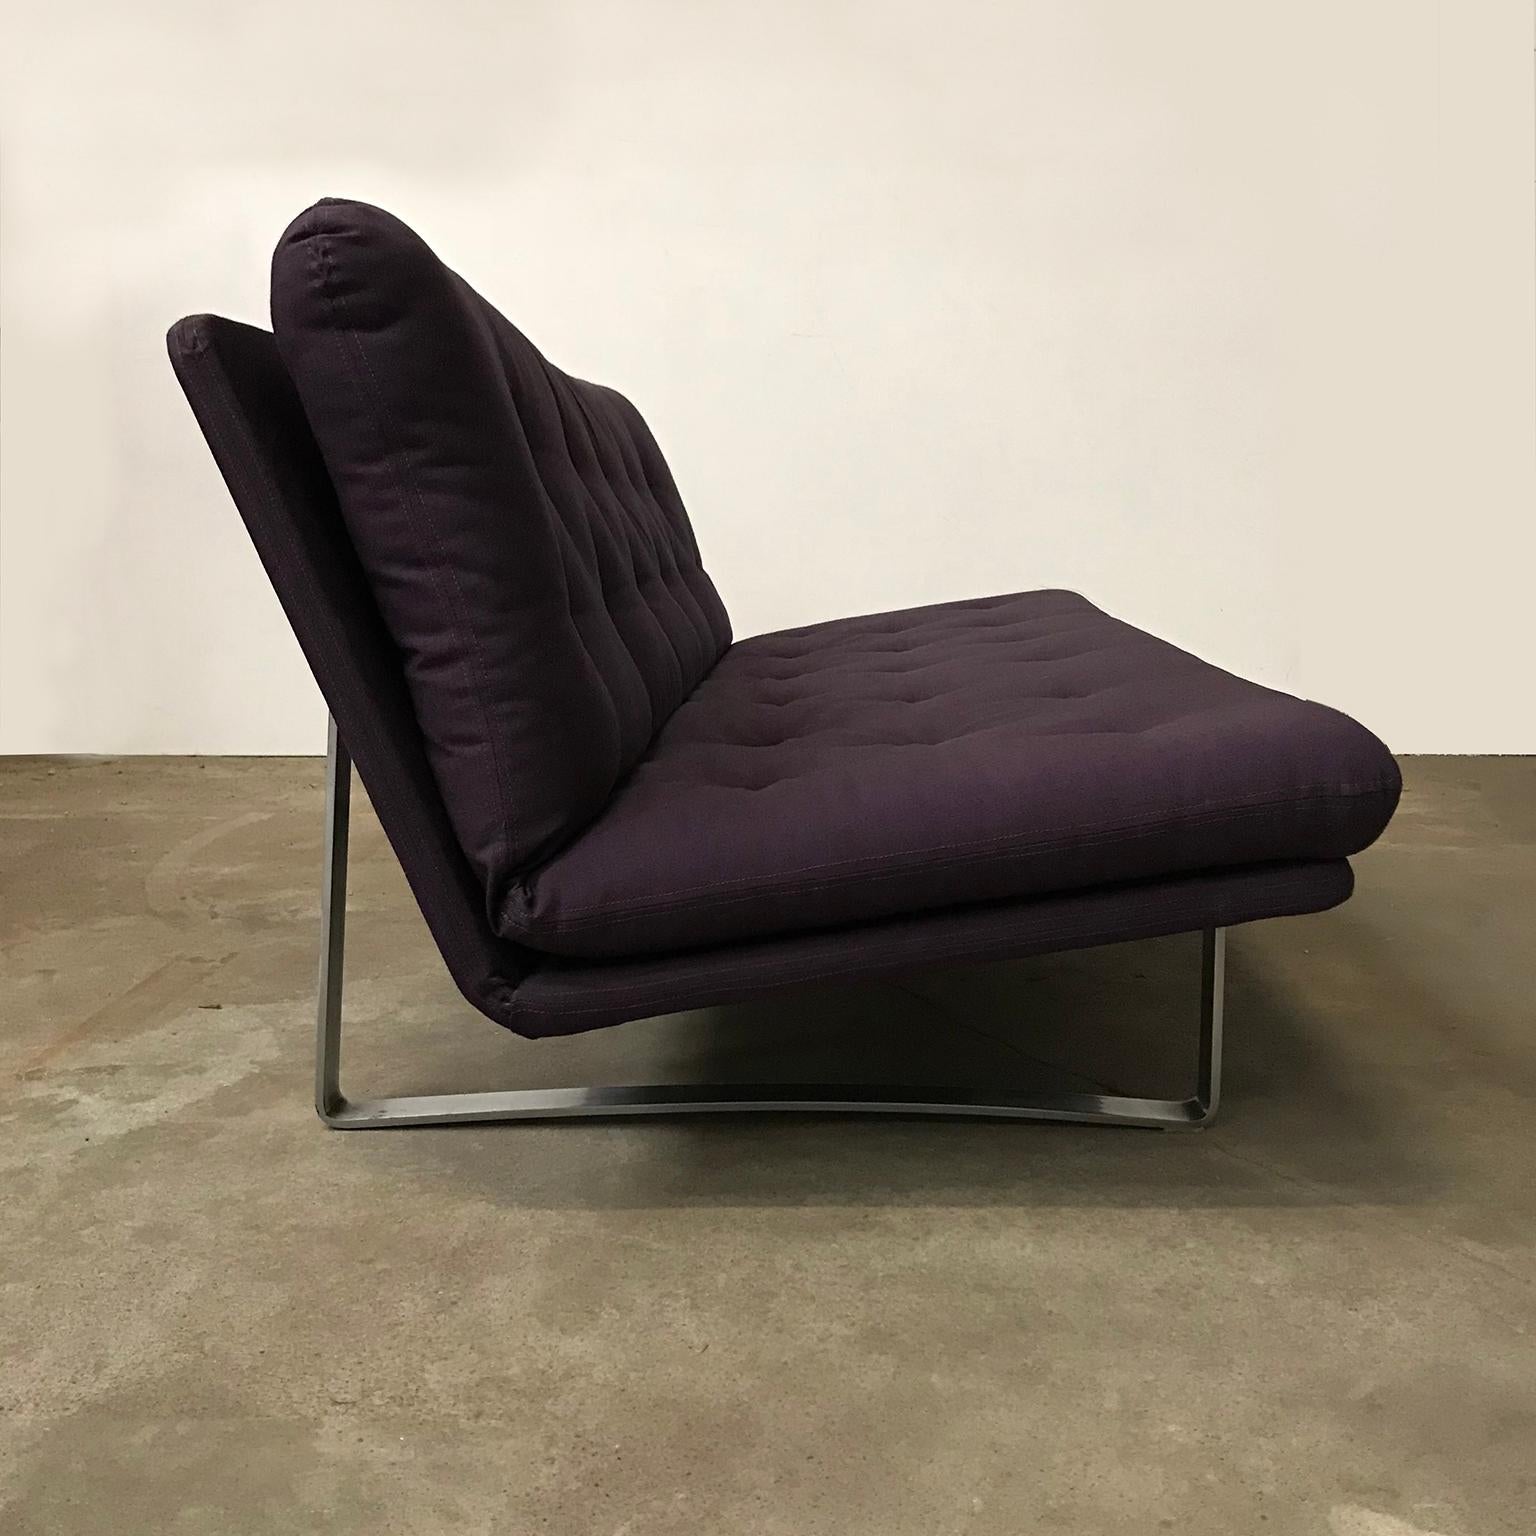 Please ask Casey Godrie Ibiza/Amsterdam for a competitive shipping quote.

Kho Liang Ie three-seat in purple. The sofa shows traces of wear but the upholstery is still very good. The upholstery is a beautiful wool that is easy to clean. Only some